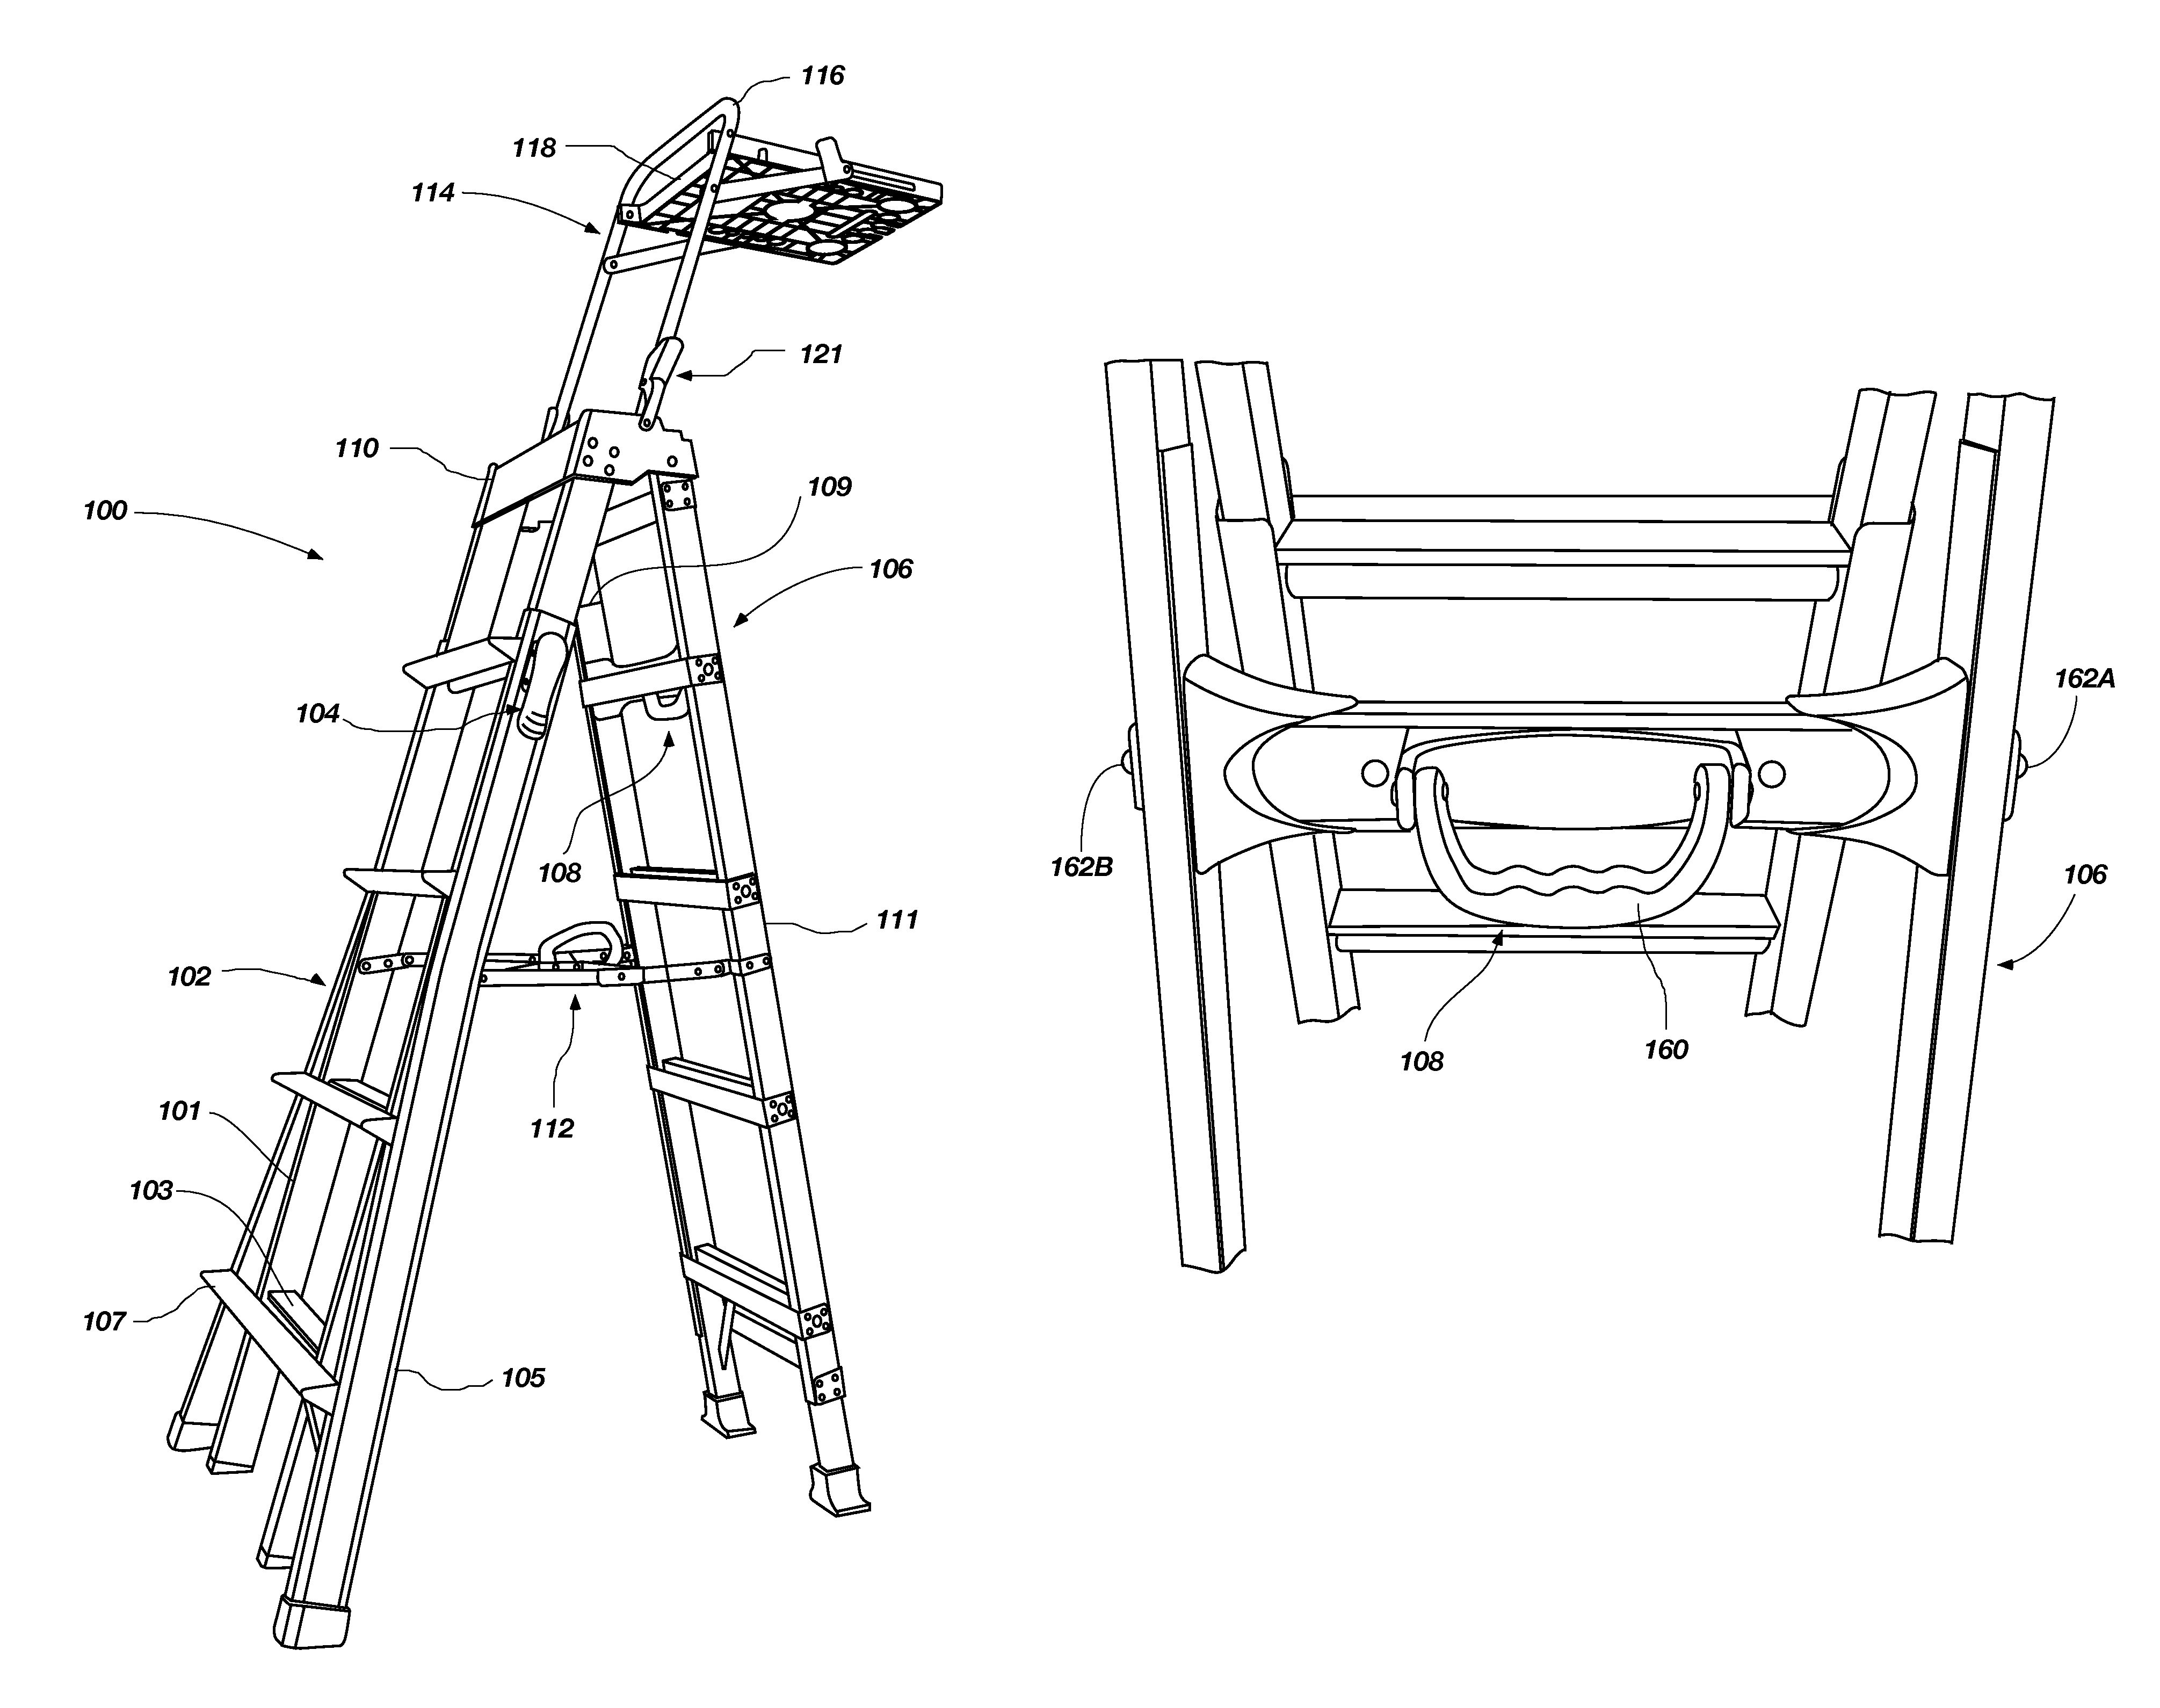 Ladders, ladder components and related methods